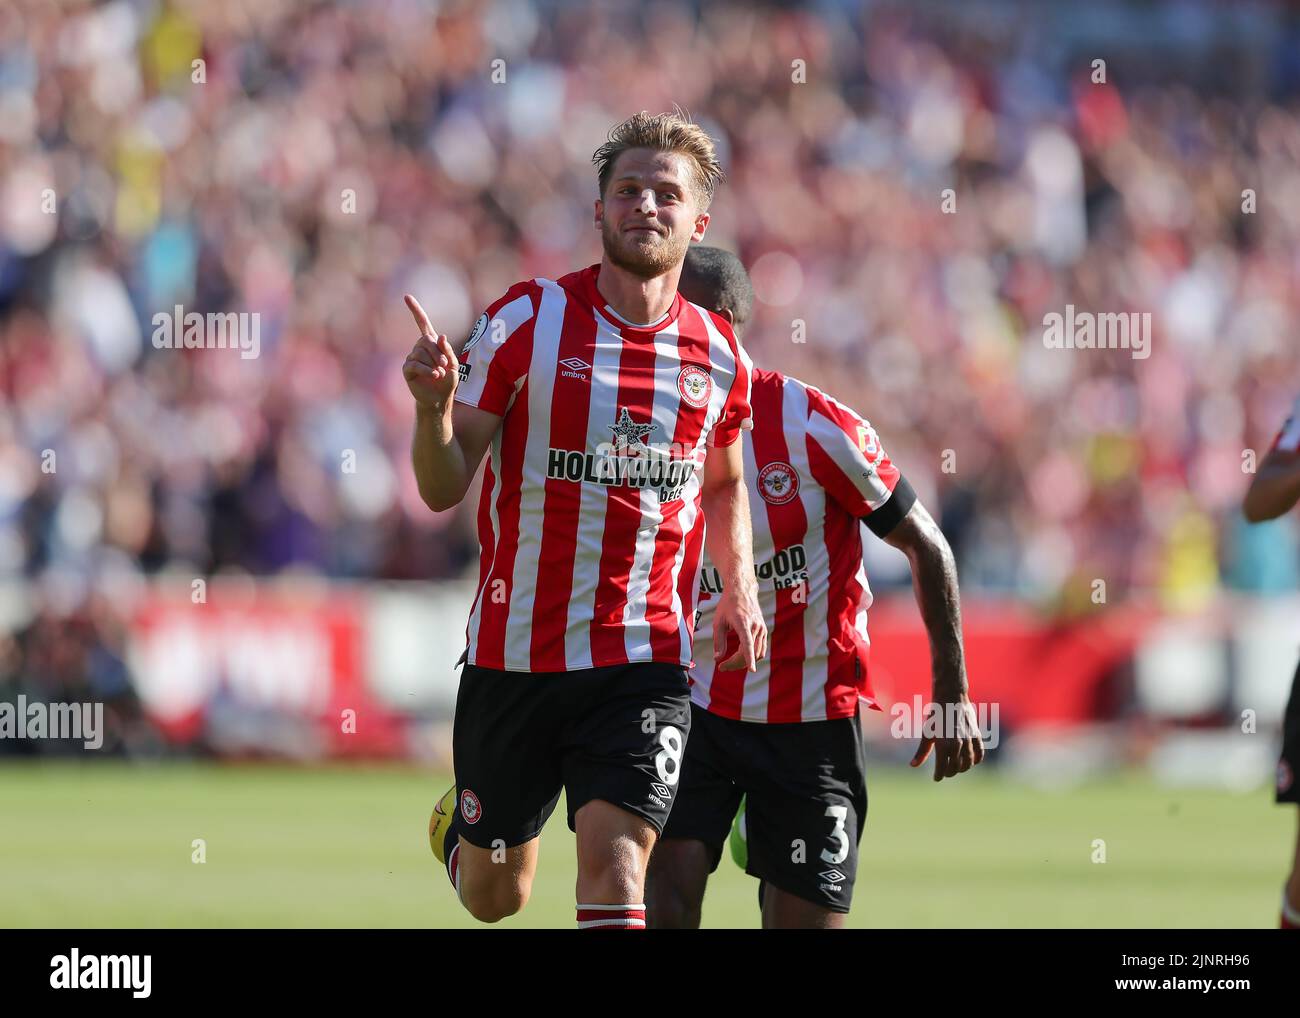 13th August 2022; Gtech Community Stadium, Brentford, London, England; Premier League football, Brentford versus Manchester United ; Mathias Jensen of Brentford celebrates towards the Man United fans after scoring his sides 2nd goal in the 18th minute to make it 2-0 Stock Photo